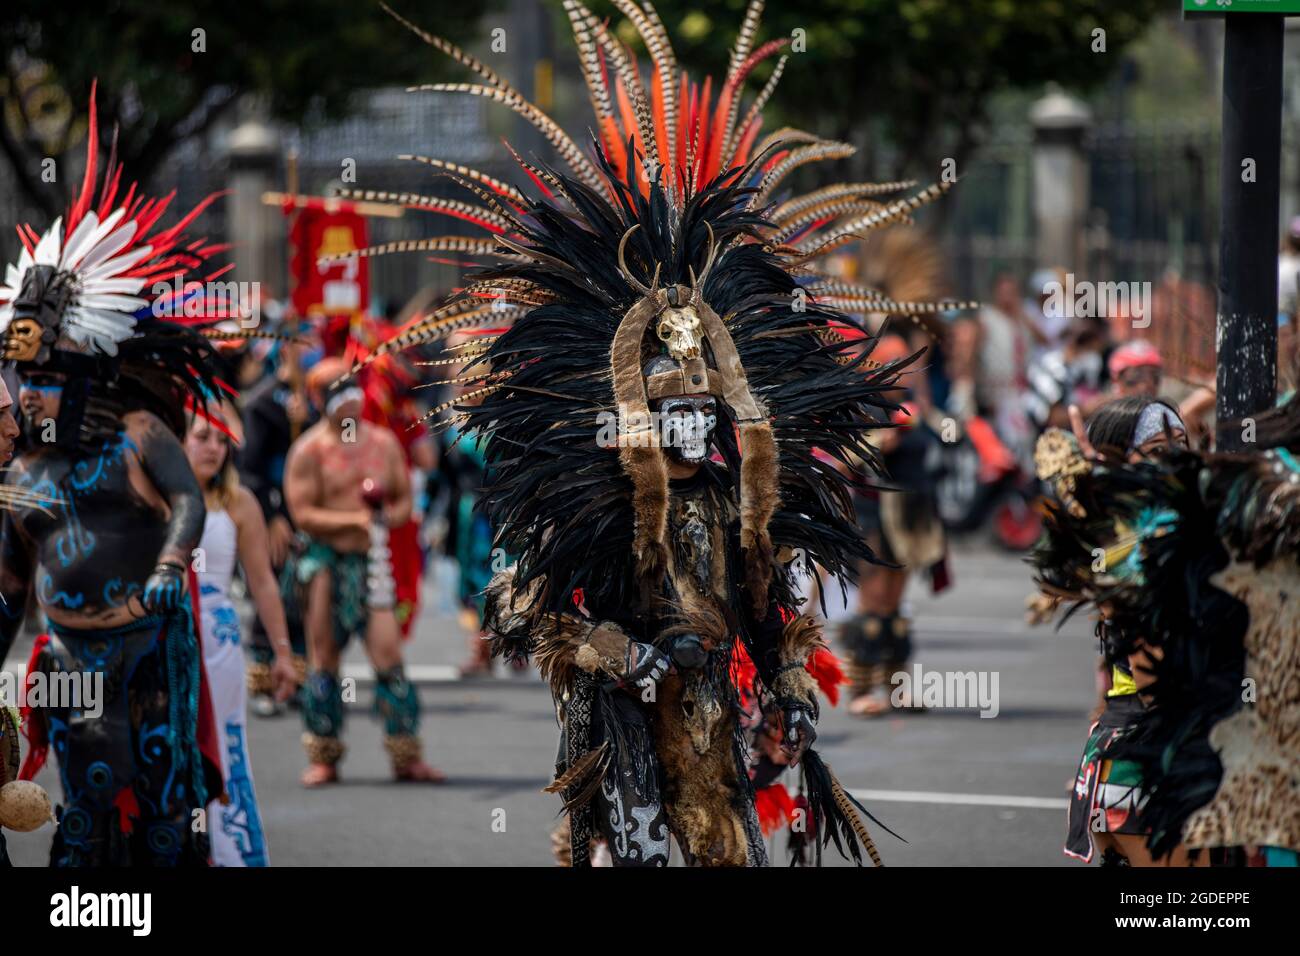 Mexiko Stadt, Mexico. 12th Aug, 2021. A man takes part in a dance on the Zocalo in Mexico City as part of the commemoration of the fall of the Aztec capital Tenochtitlán. In 2021, Mexico will mark the 500th anniversary of the conquest of the Aztec land by the Spanish. (to dpa: Moctezuma's legacy: Mexico reworks conquest after 500 years) Credit: Jair Cabrera Torres/dpa/Alamy Live News Stock Photo